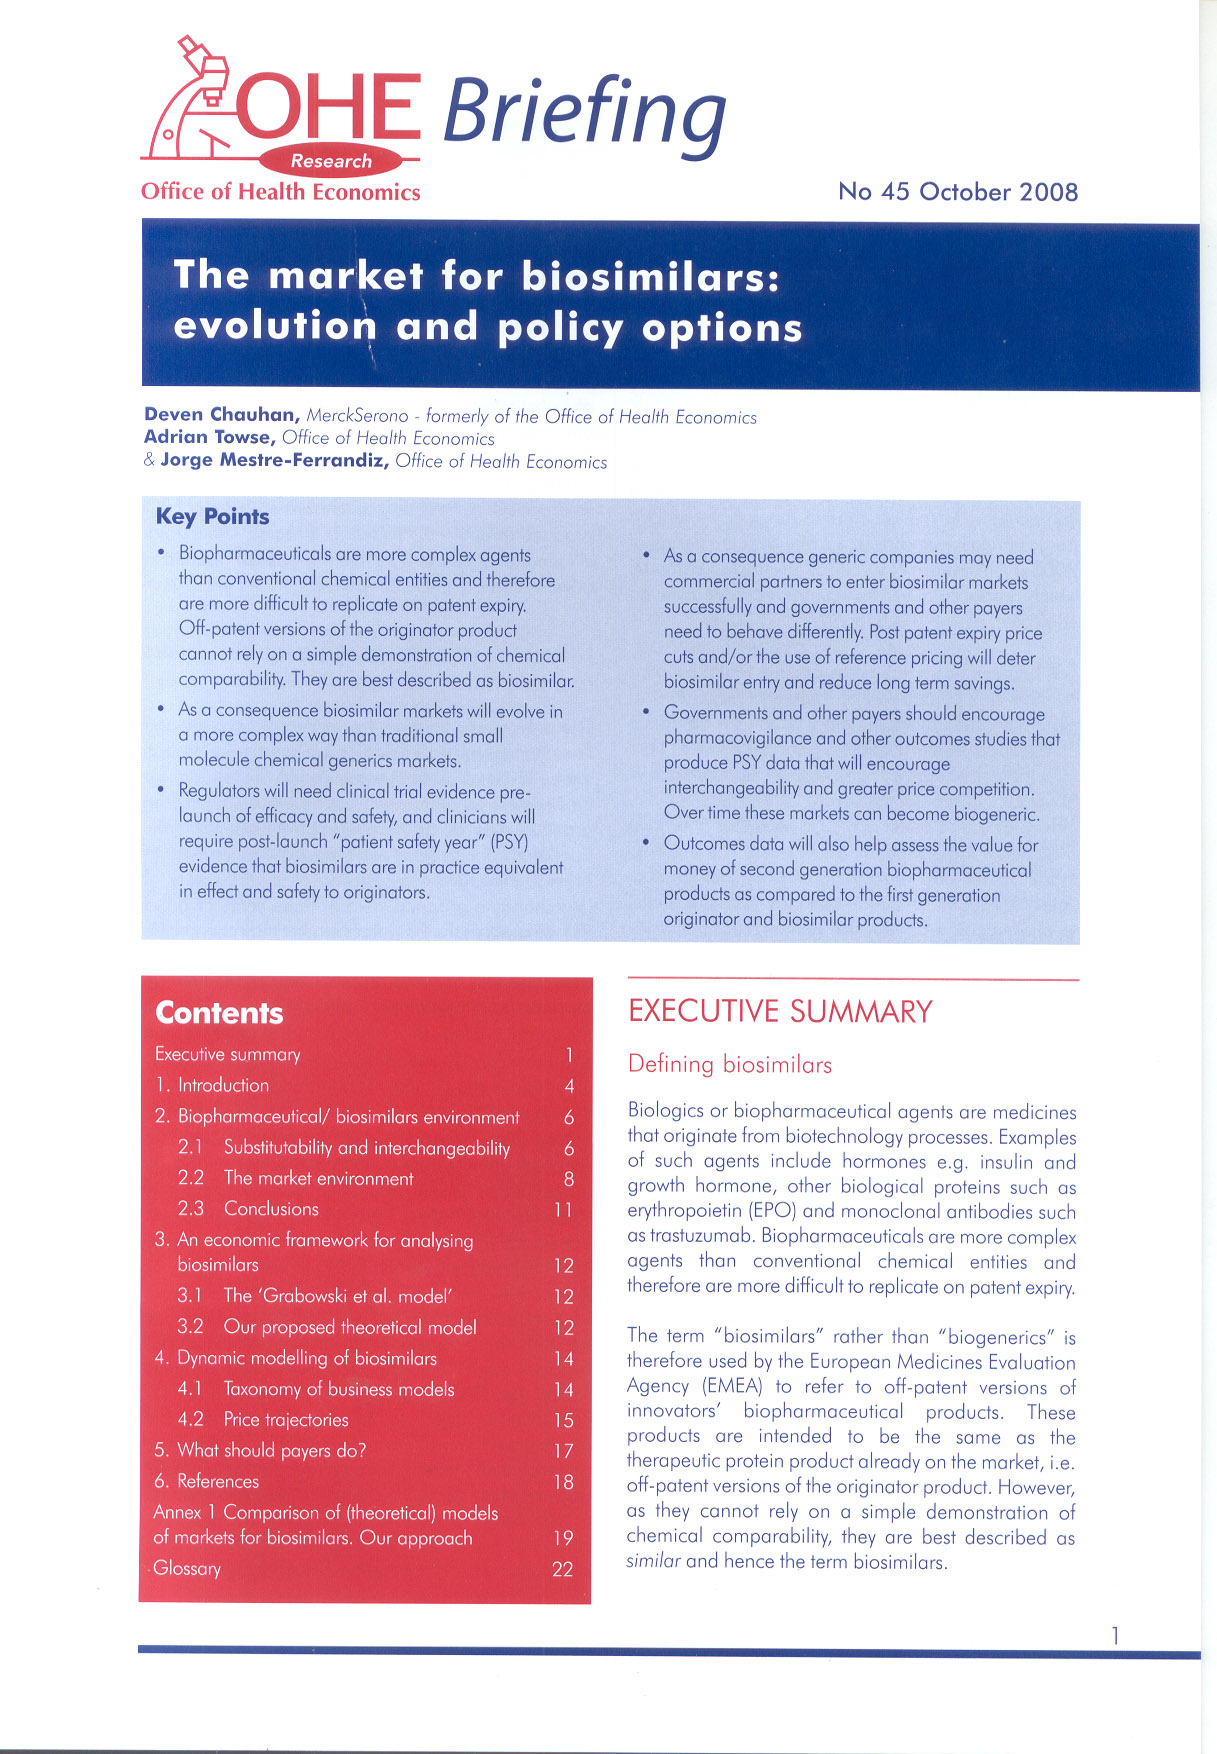 The Market for Biosimilars: Evolution and Policy Options